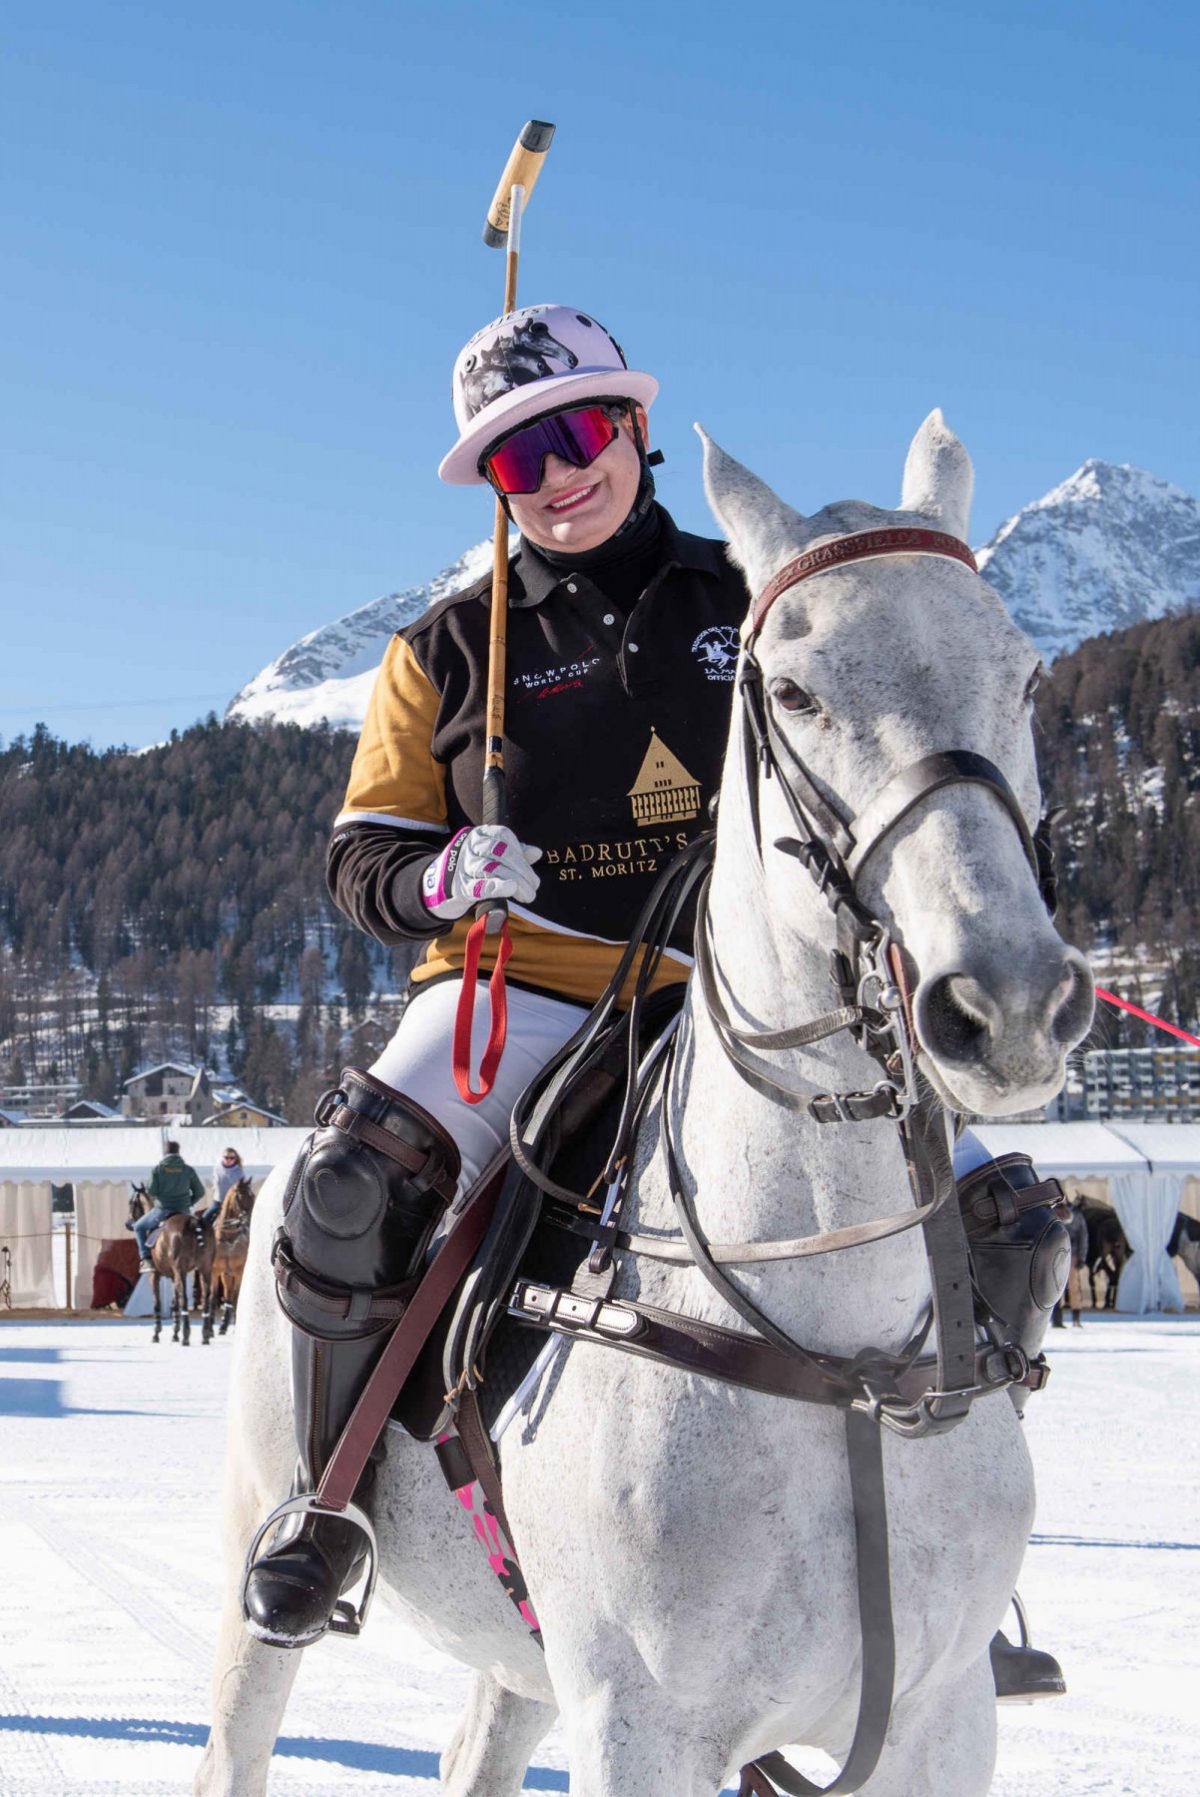 Melissa Ganzi on her horse at the Snow Polo World Cup St. Moritz